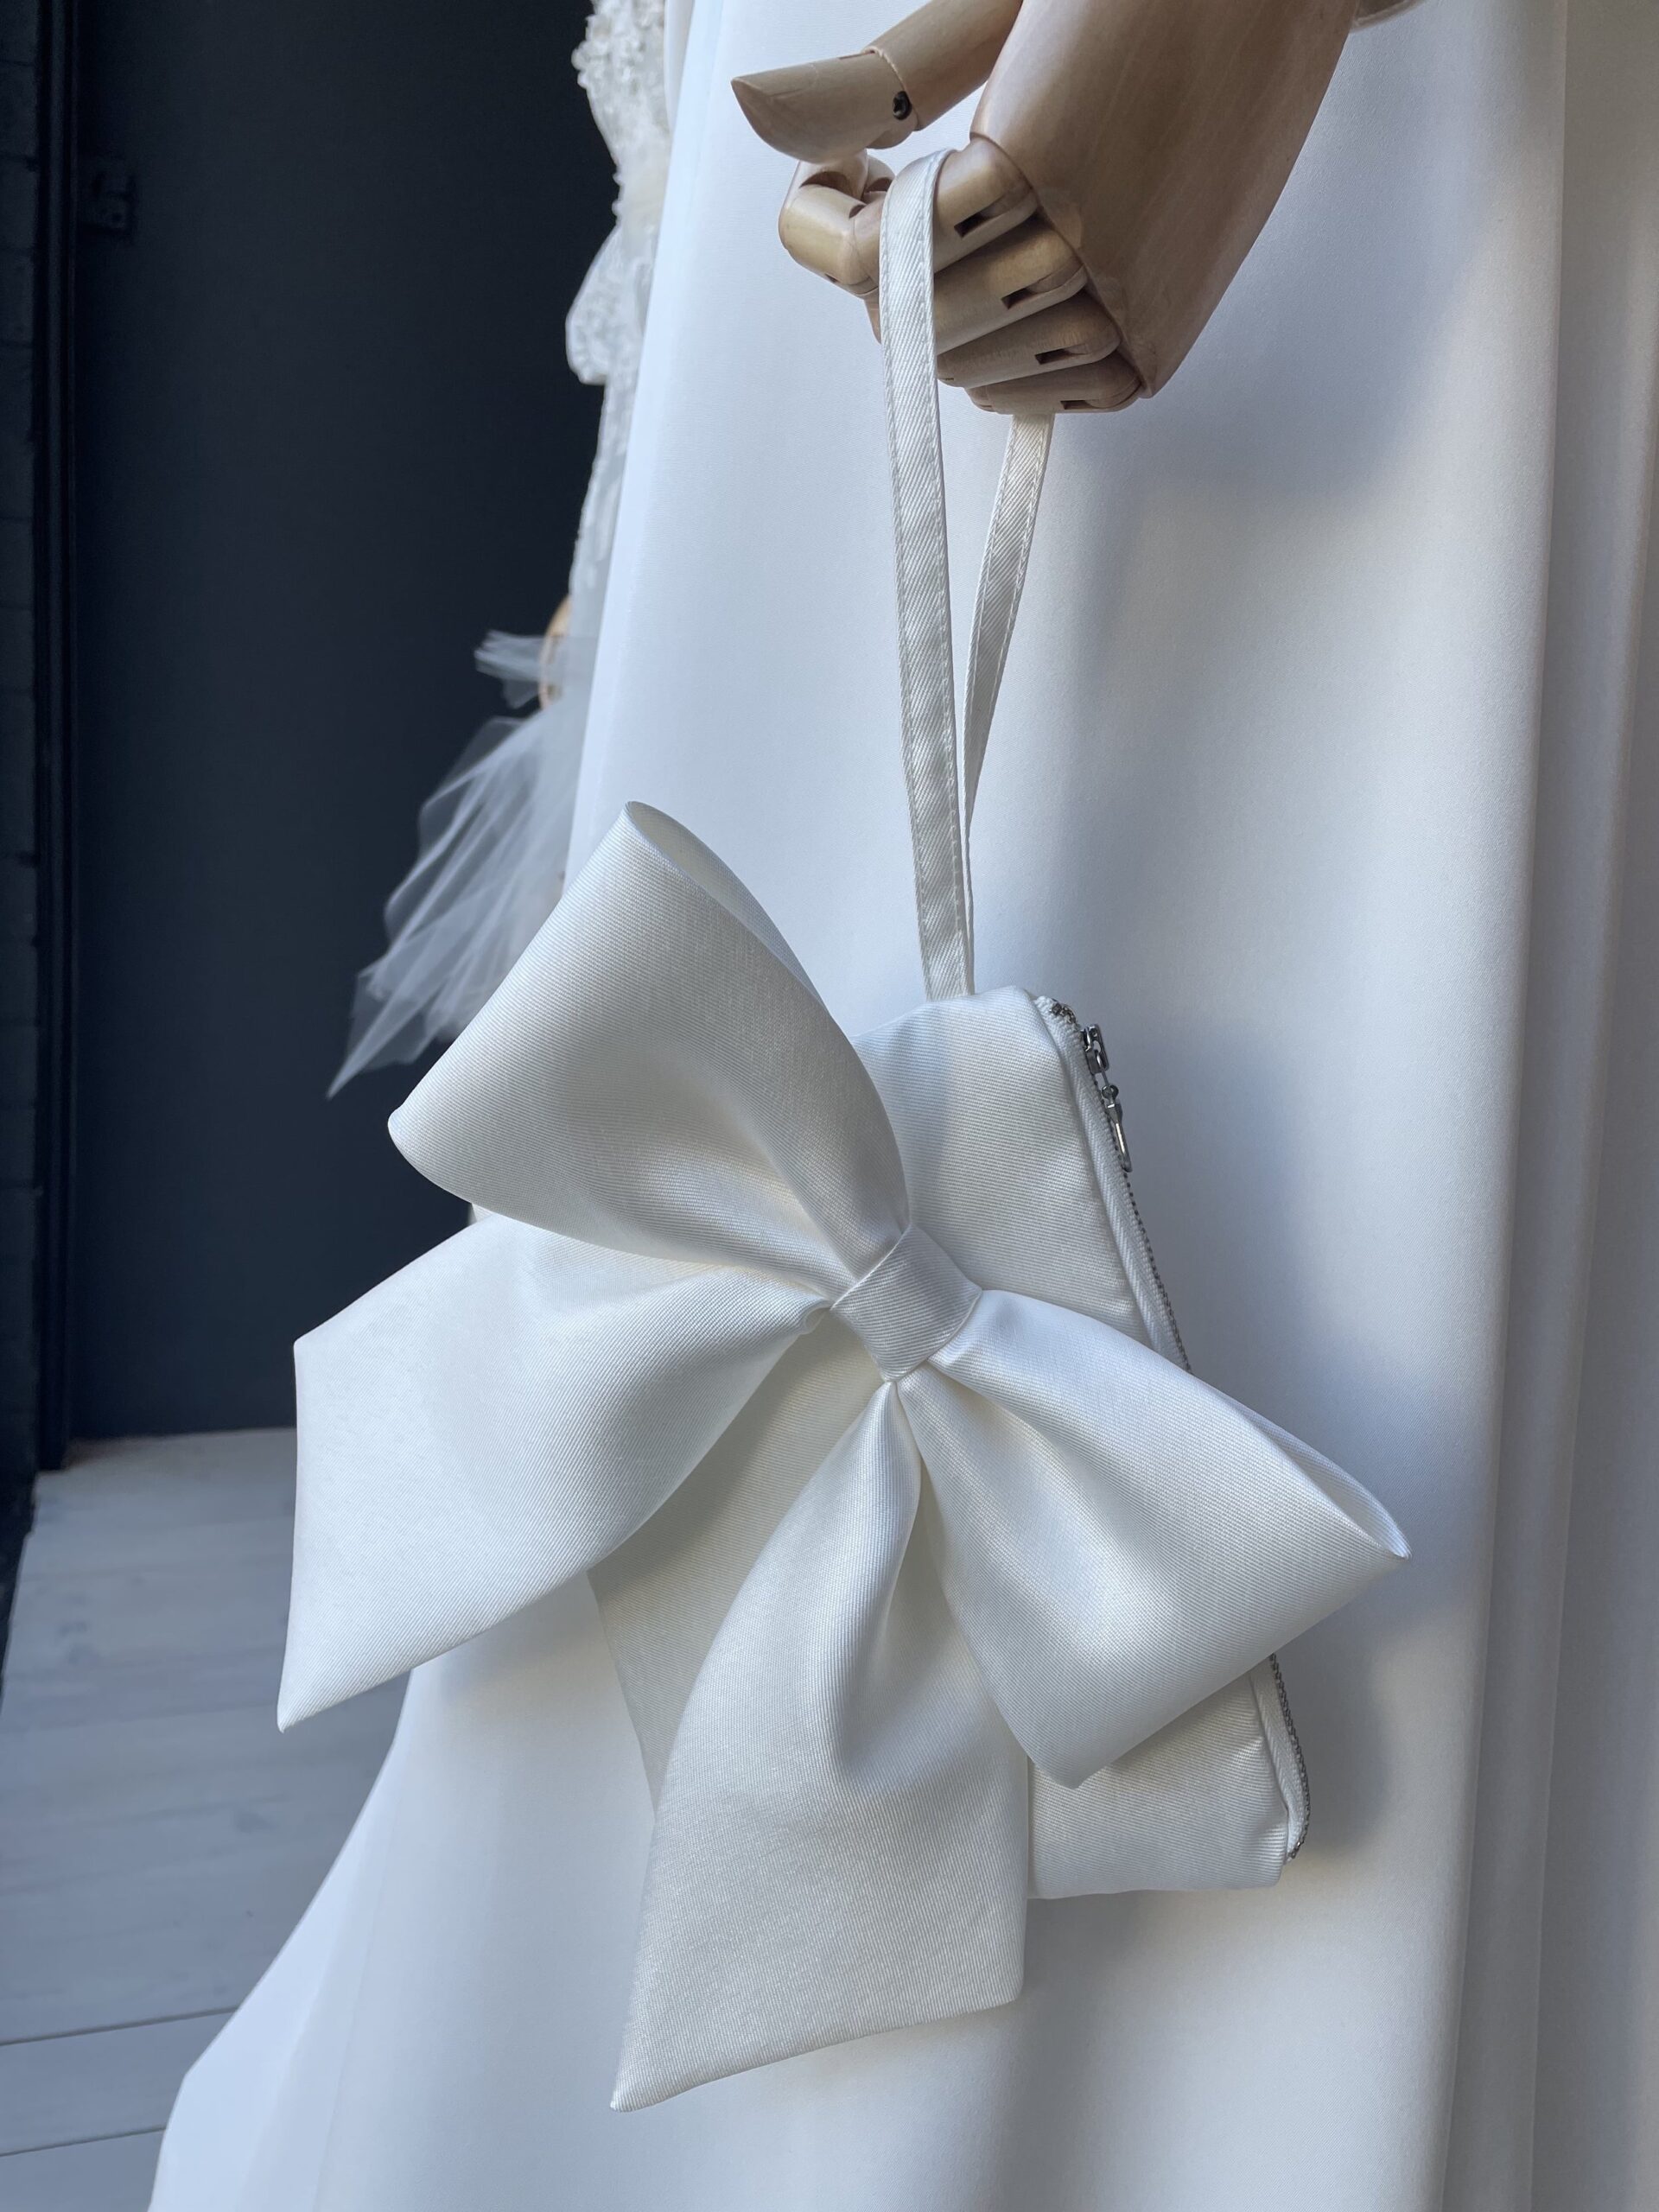 Mannequin with wooden hands in ivory satin gown holding Mica bag in Twill by the wrist strap